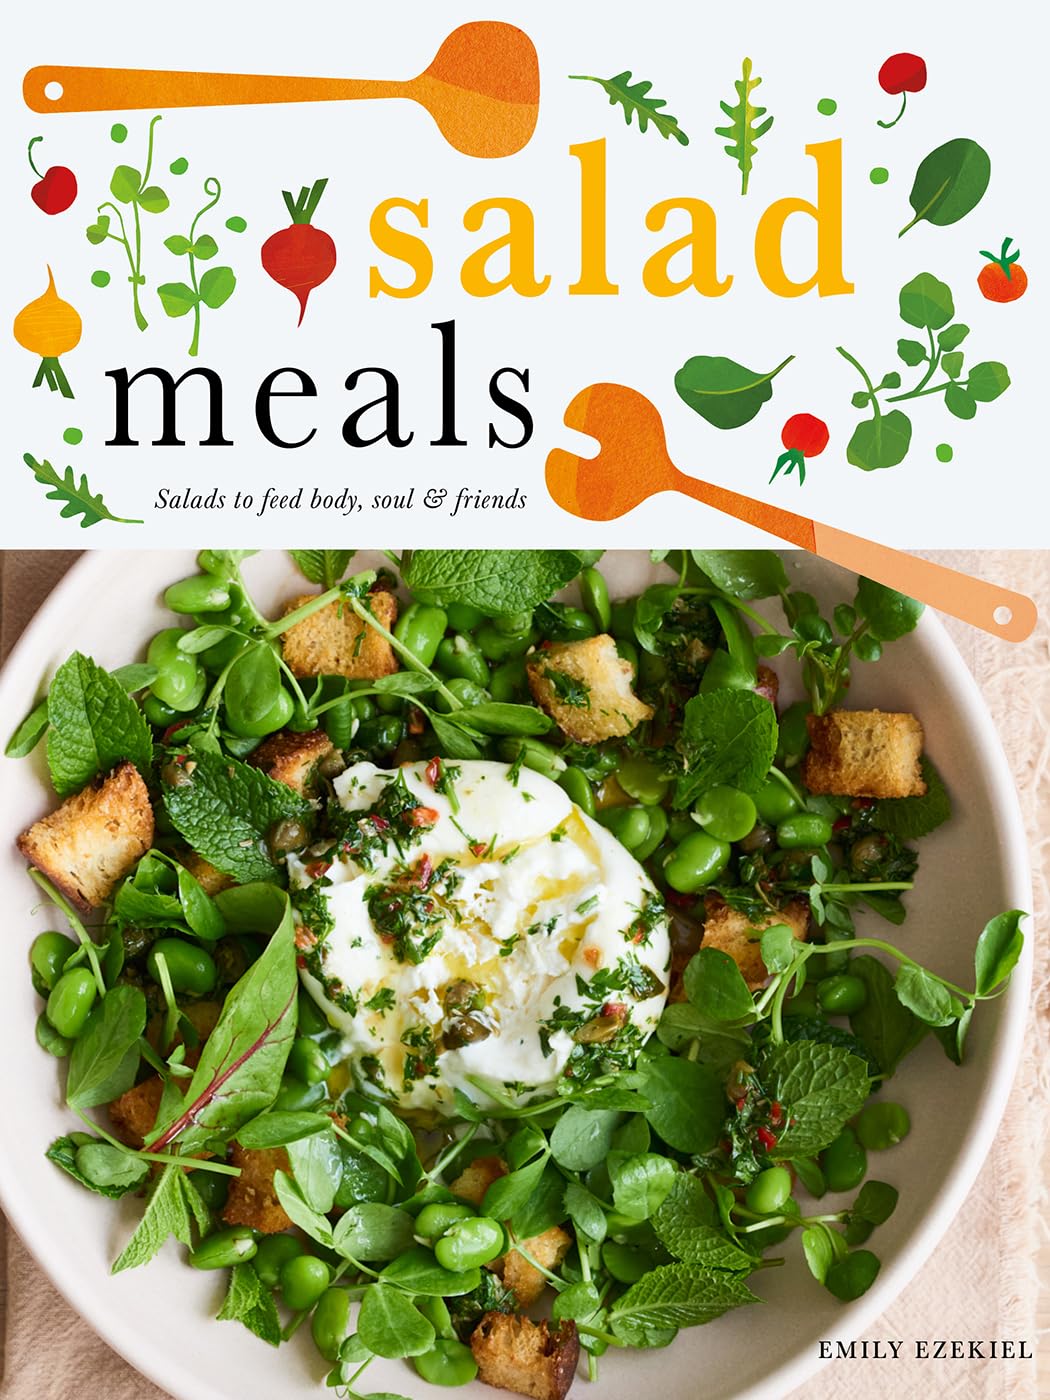 Hank & Sylvie's - Salad Meals: Salads to Feed Body, Soul & Friends